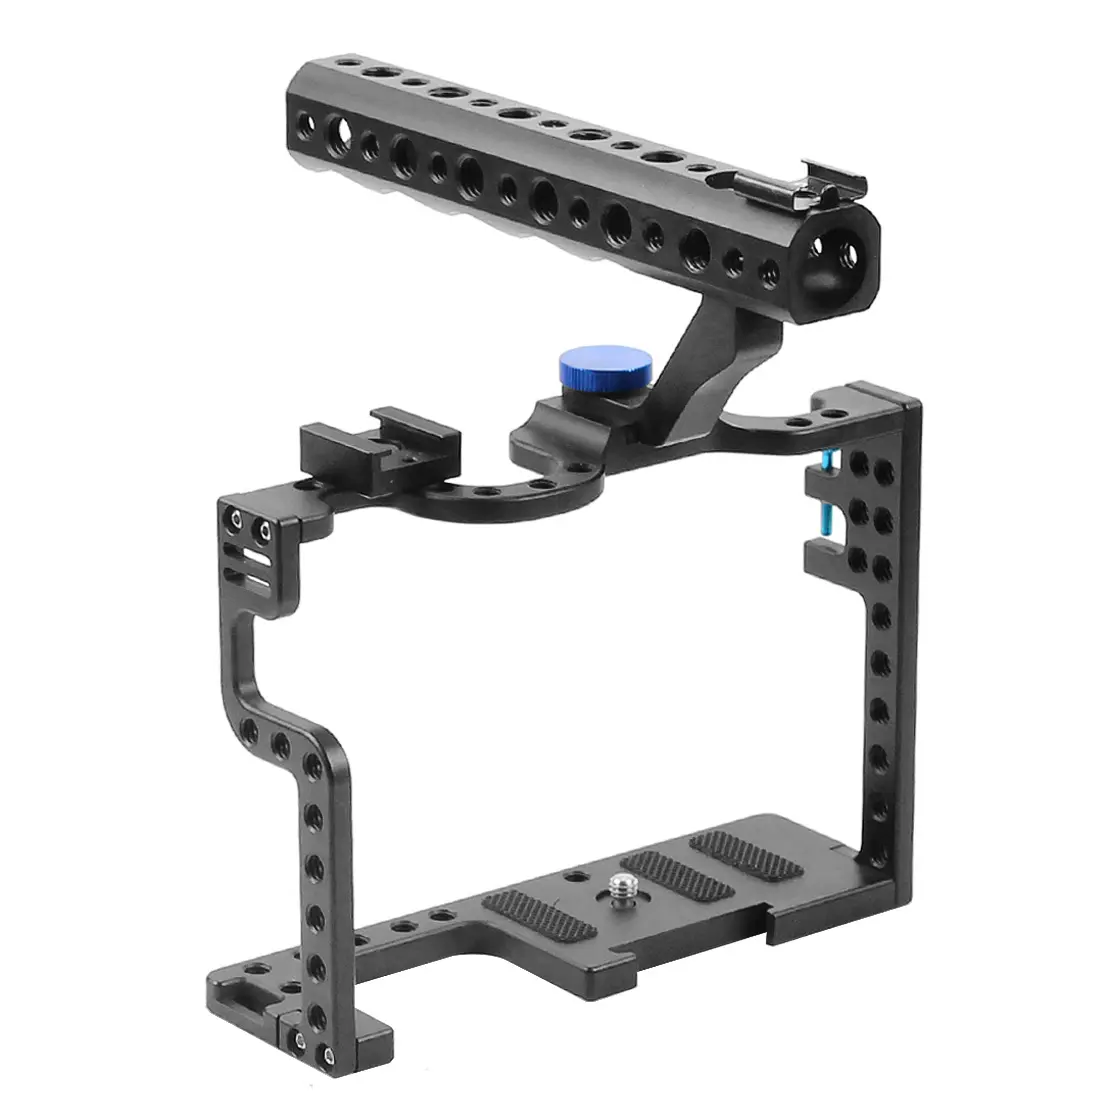 FEICHAO Cold Shoe Mount Bracket Stabilizer Frame Extended Handheld Grip Cage For Panasonic GH5